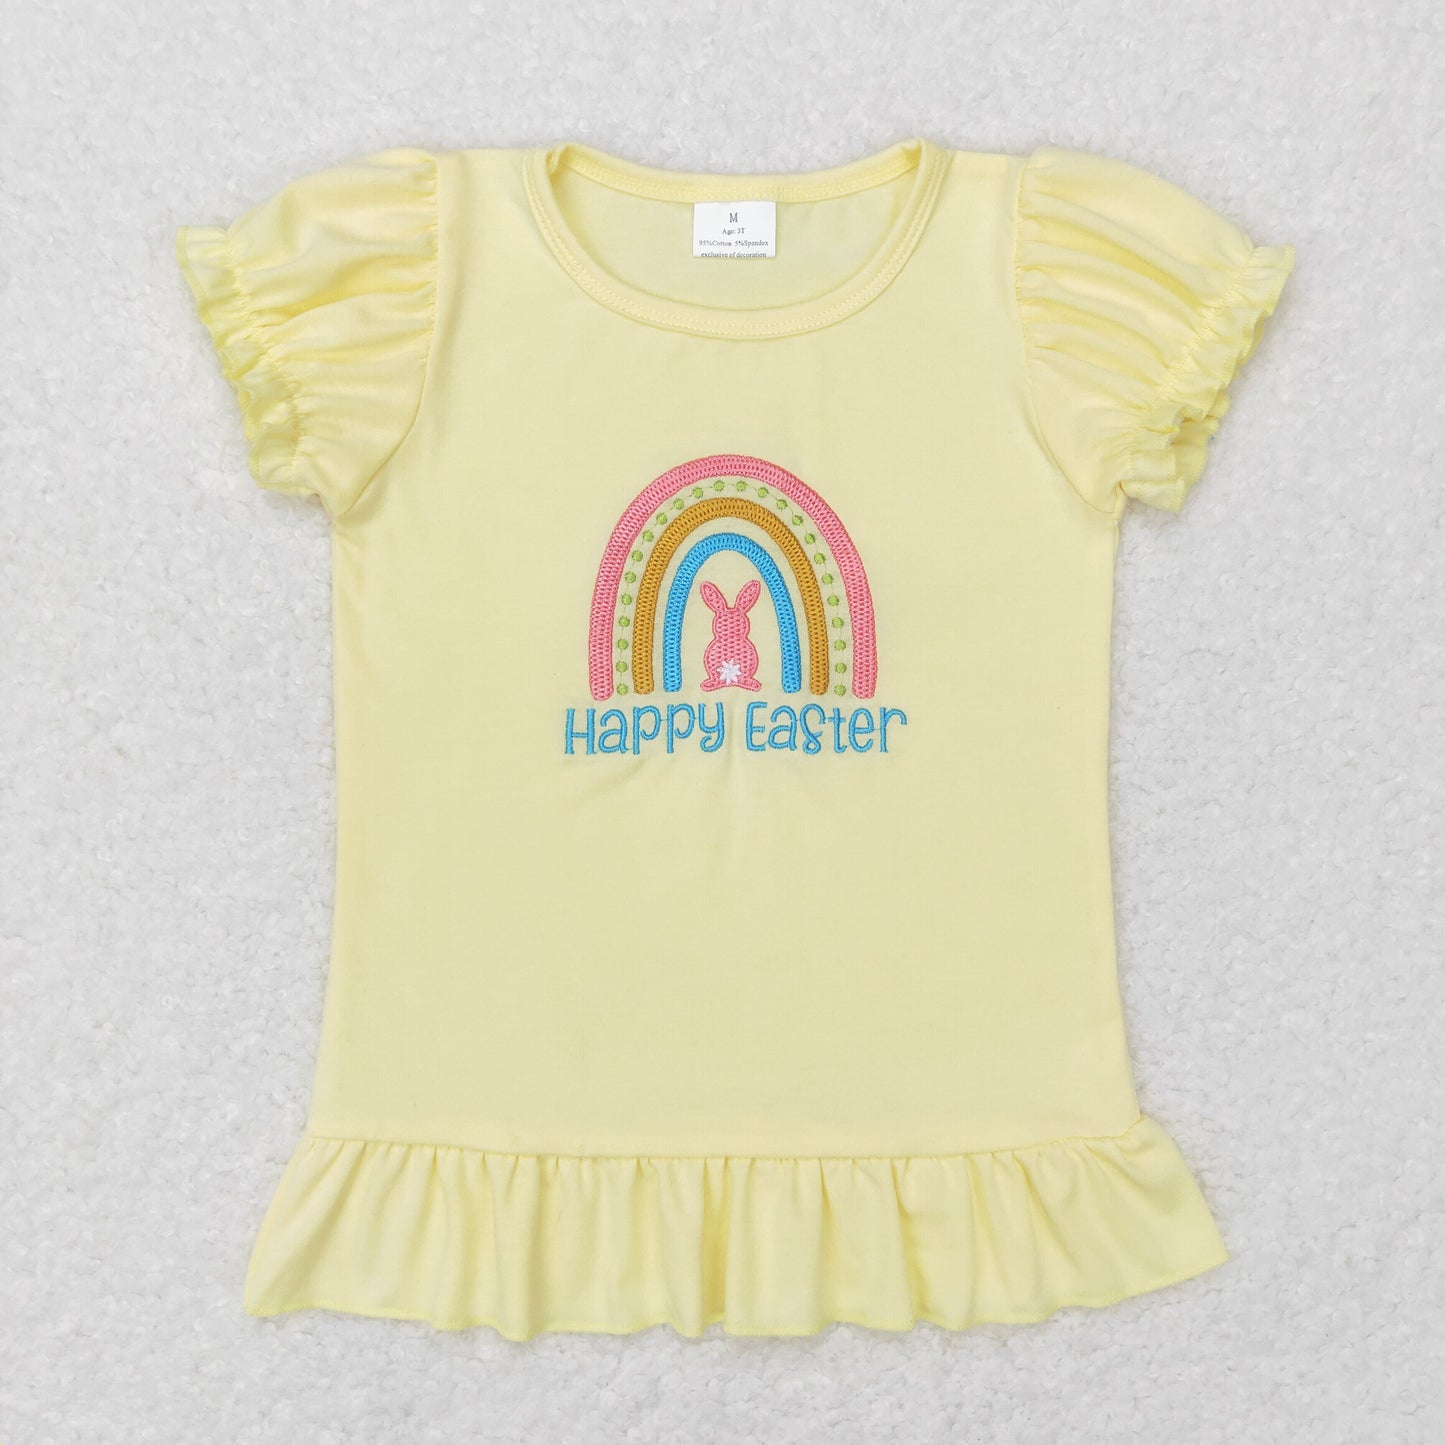 happy easter baby girl embroidery yellow ruffle t-shirt